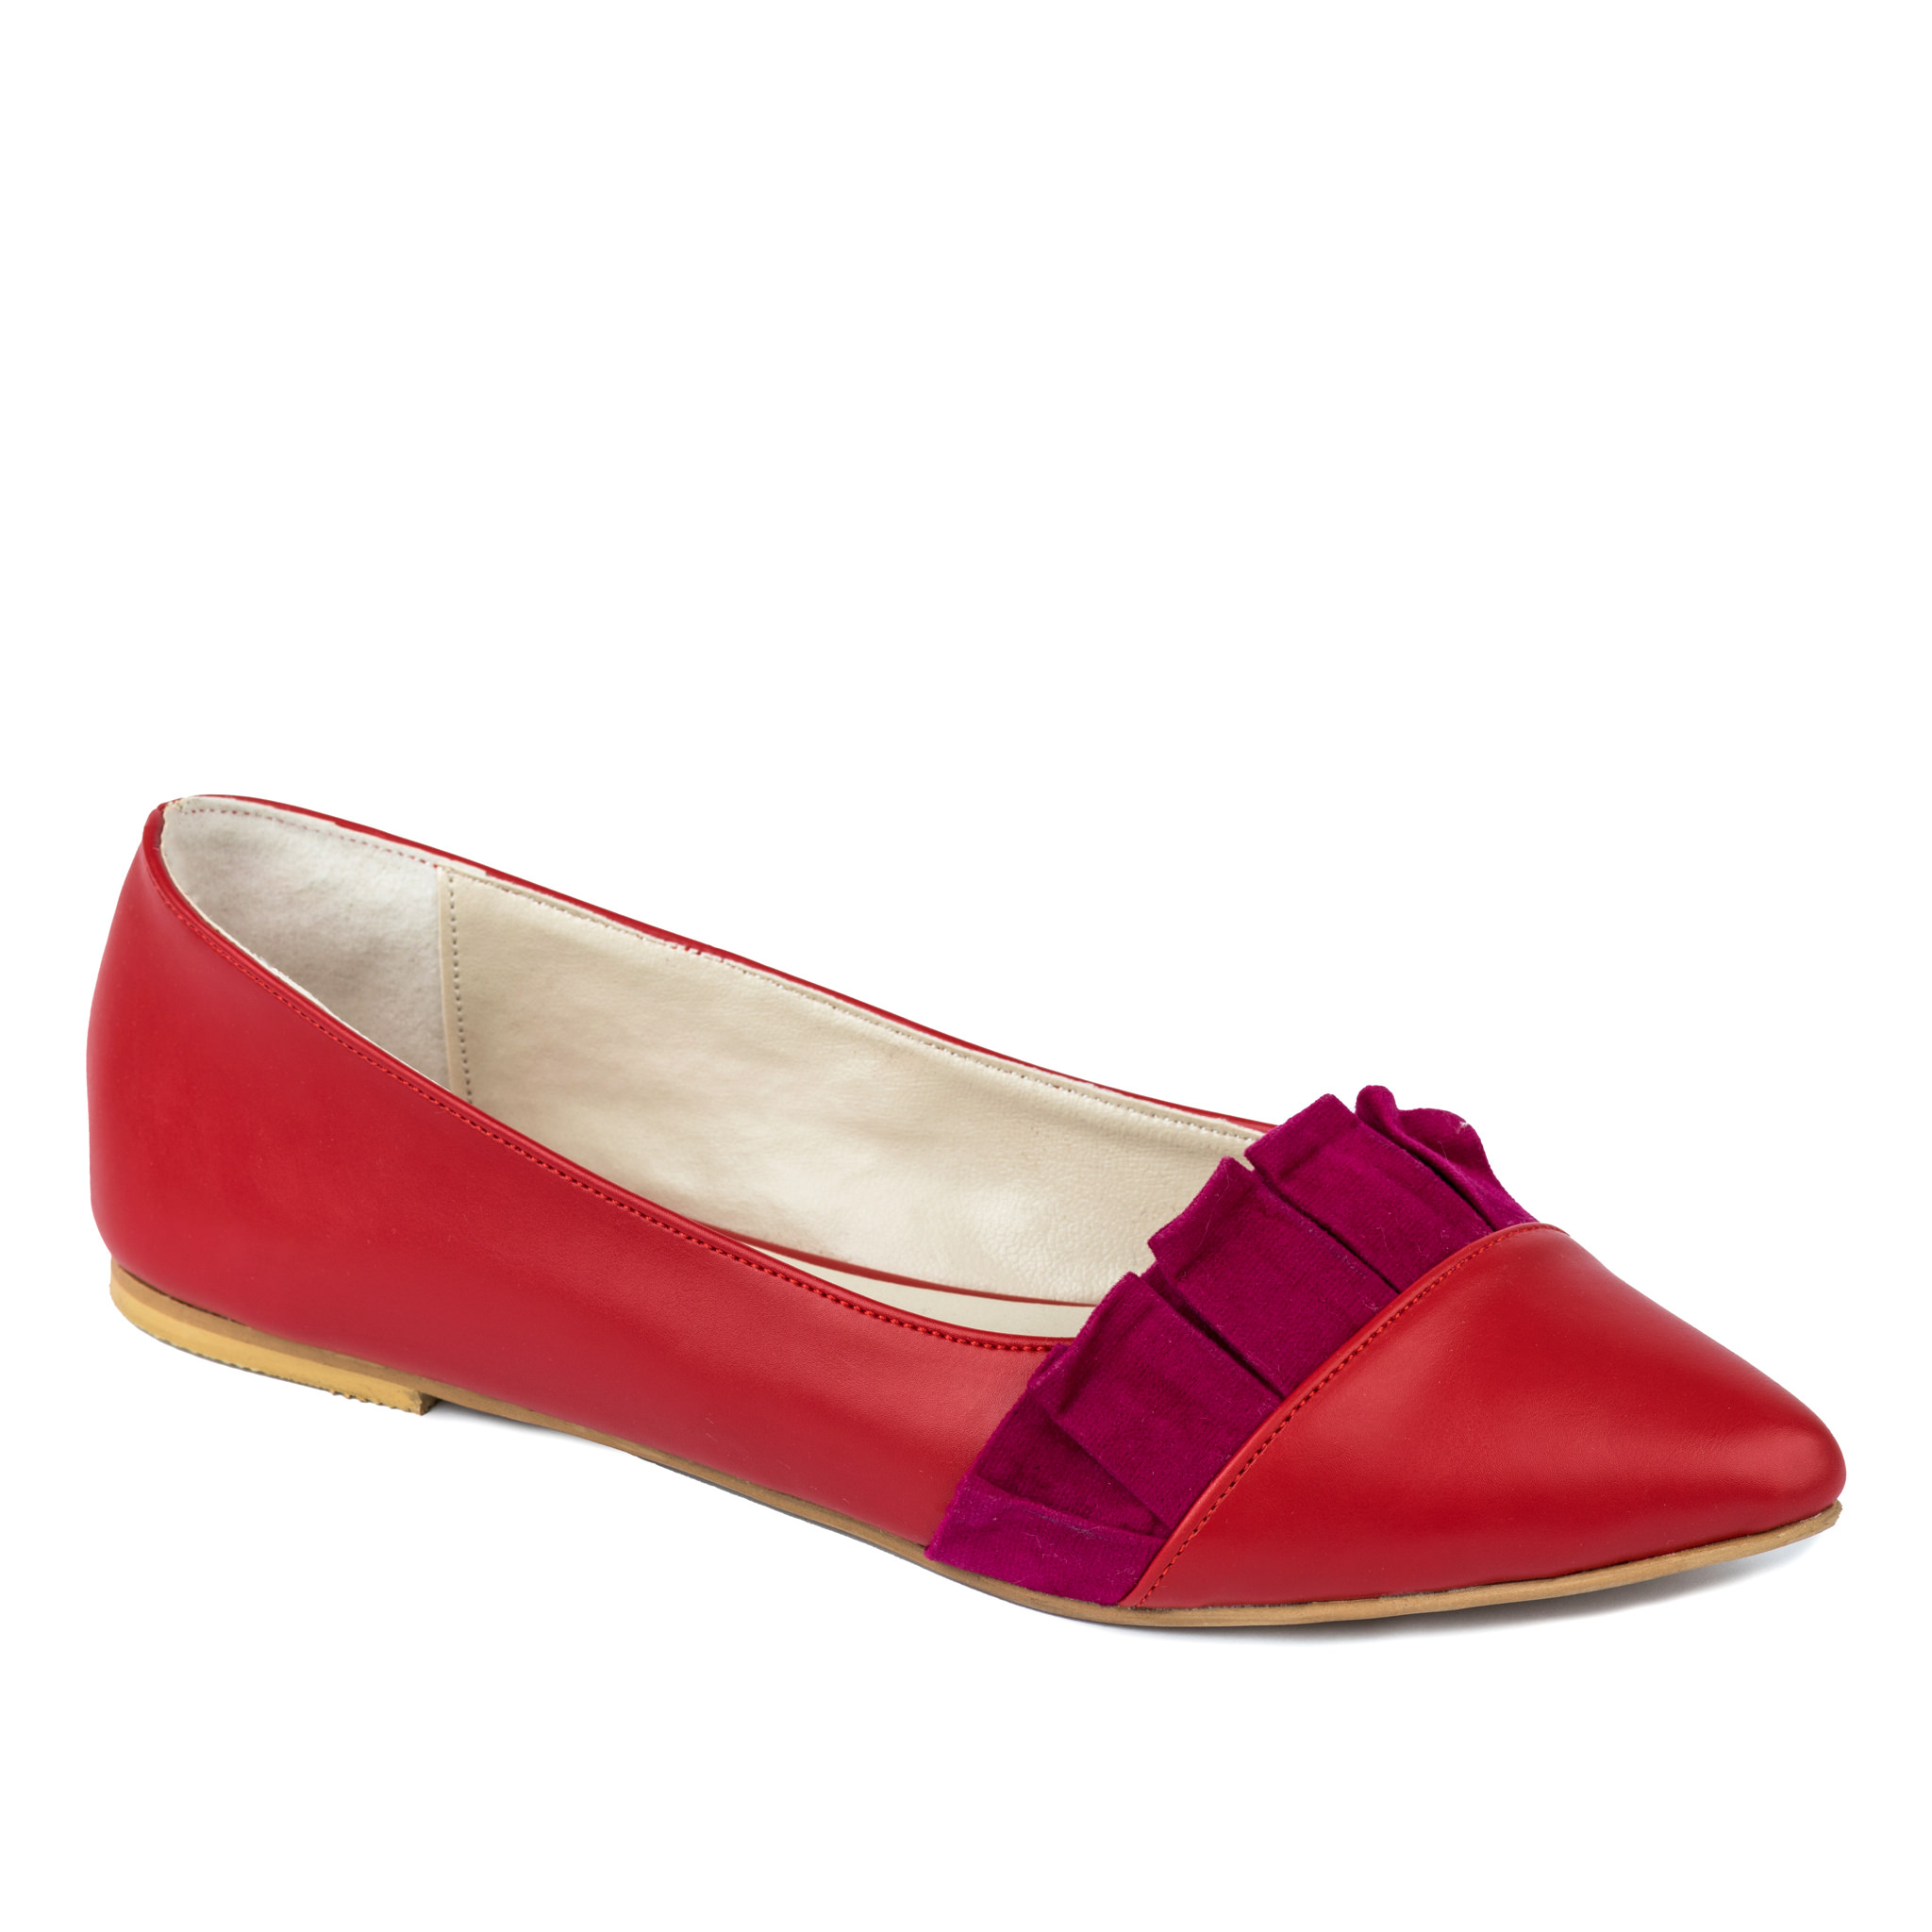 POINTED FLATS - RED